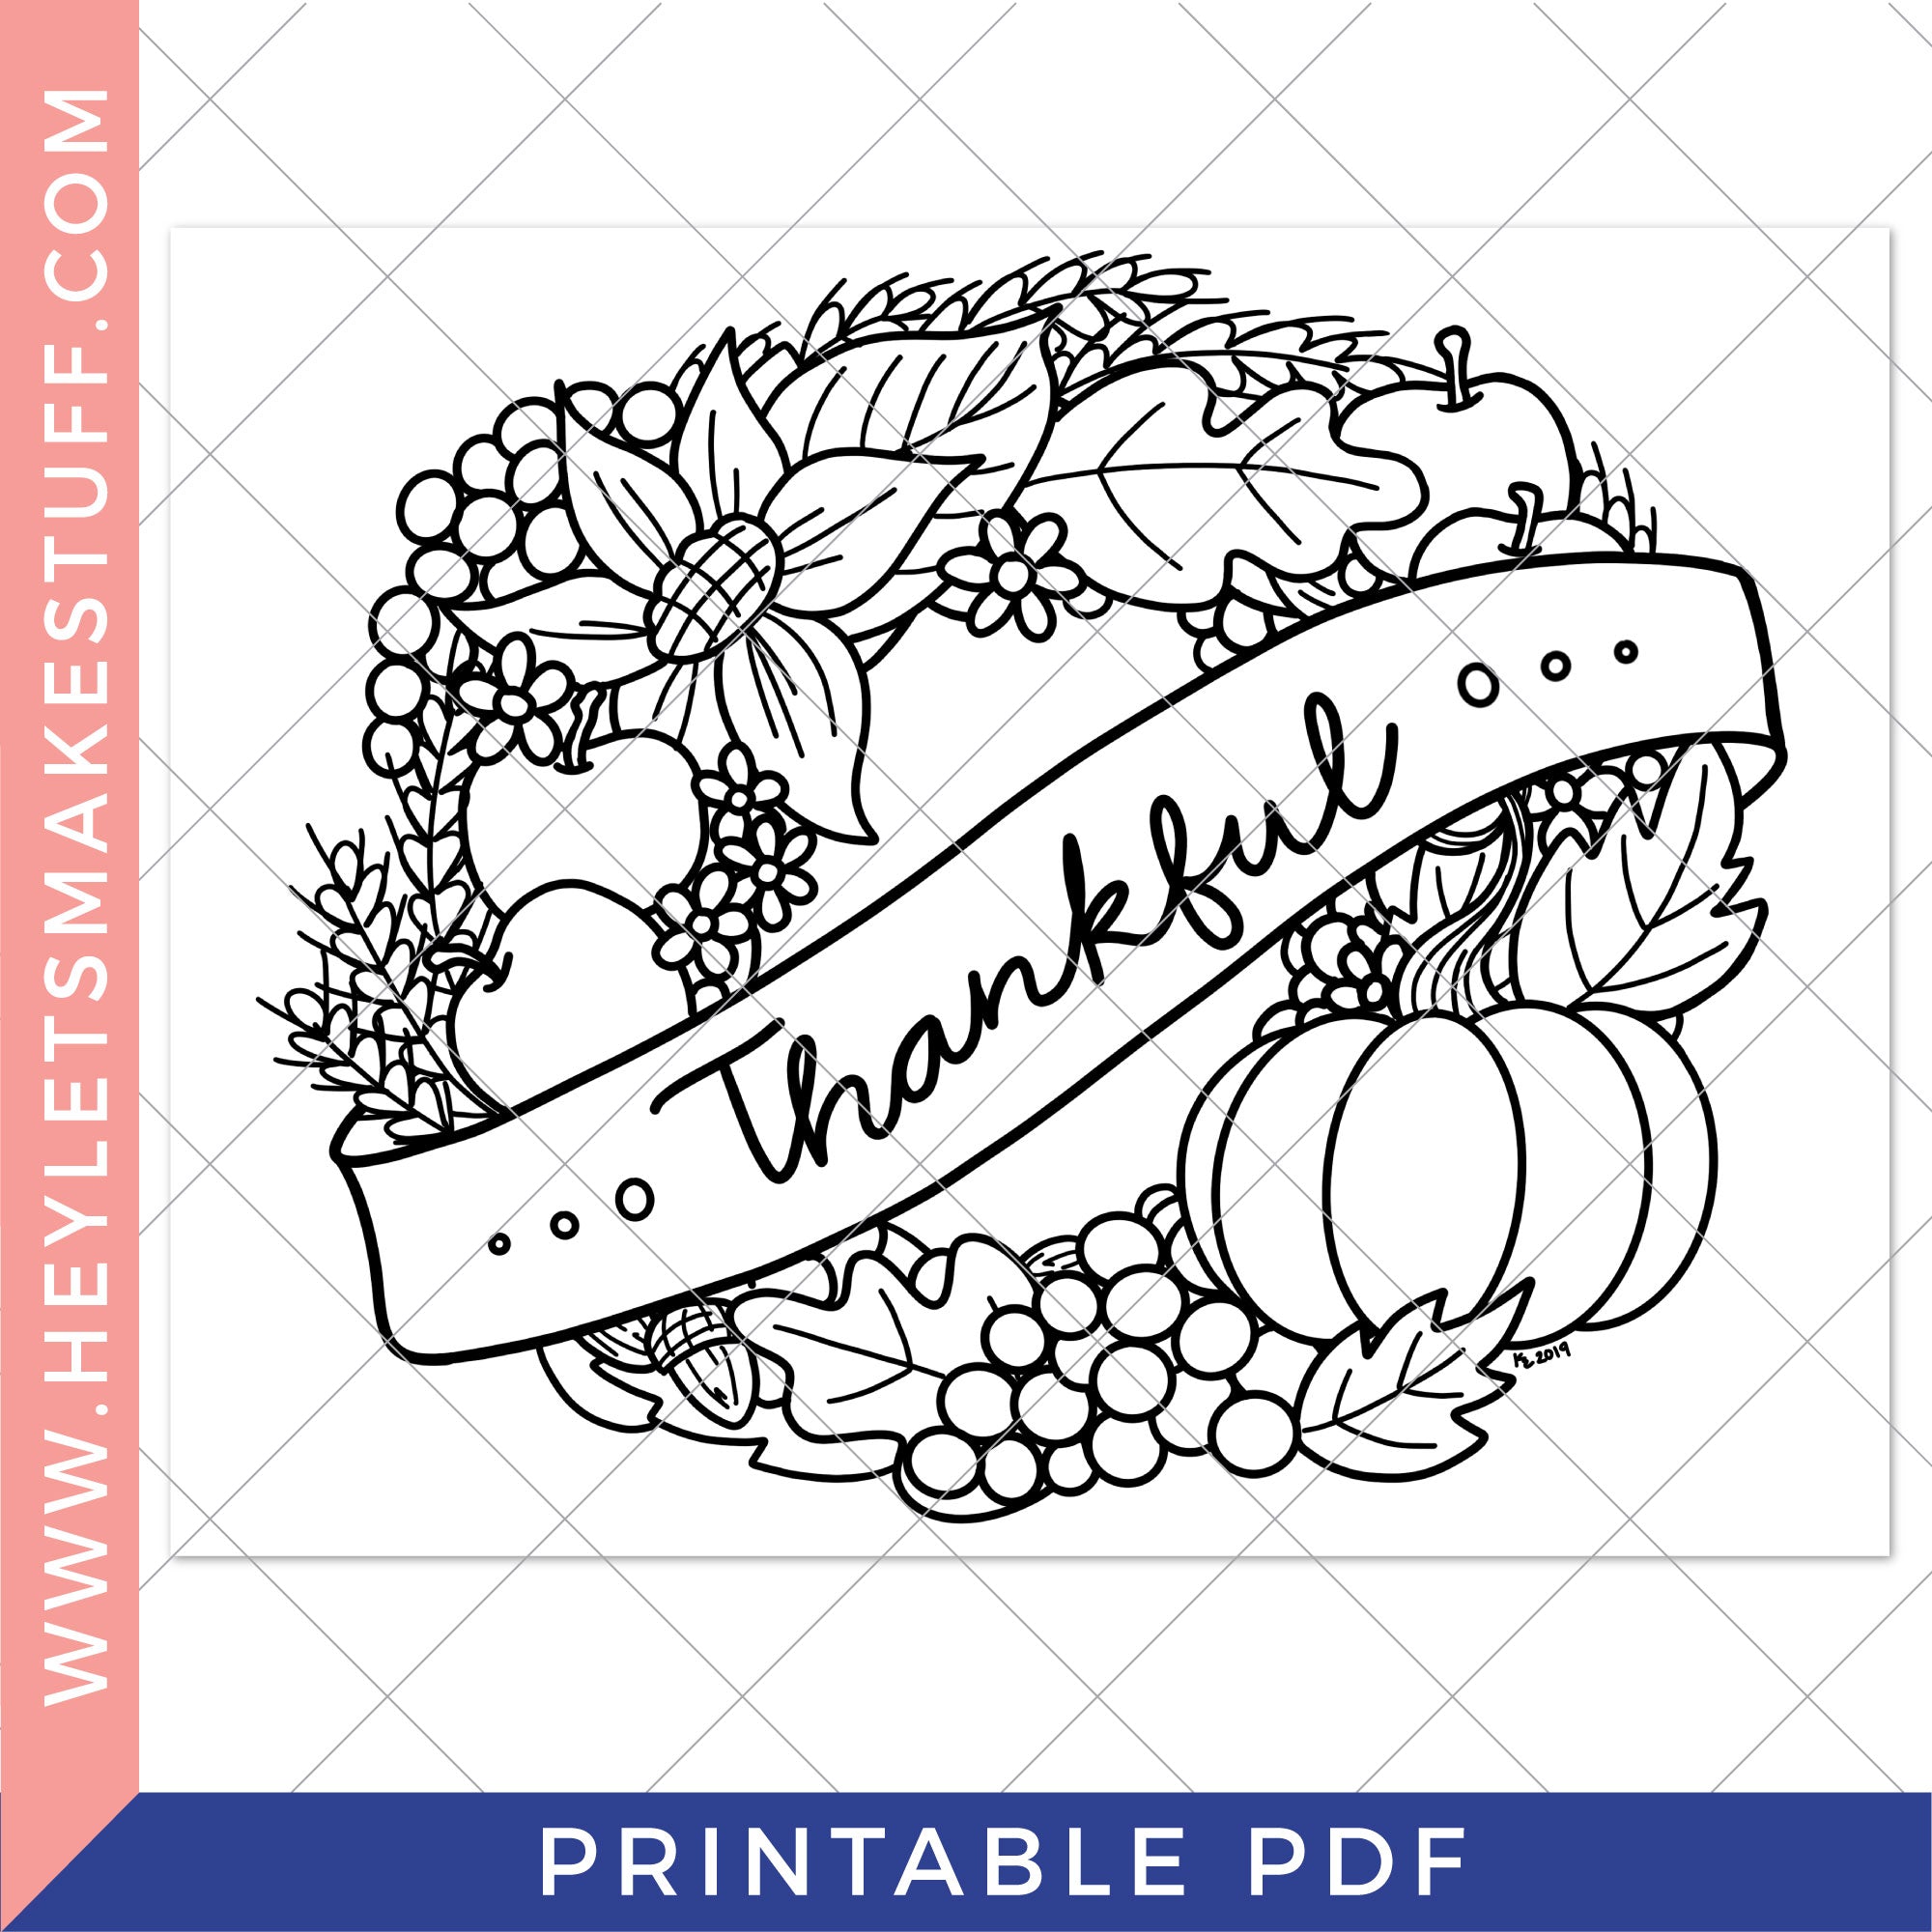 Printable thanksgiving coloring page â hey lets make stuff